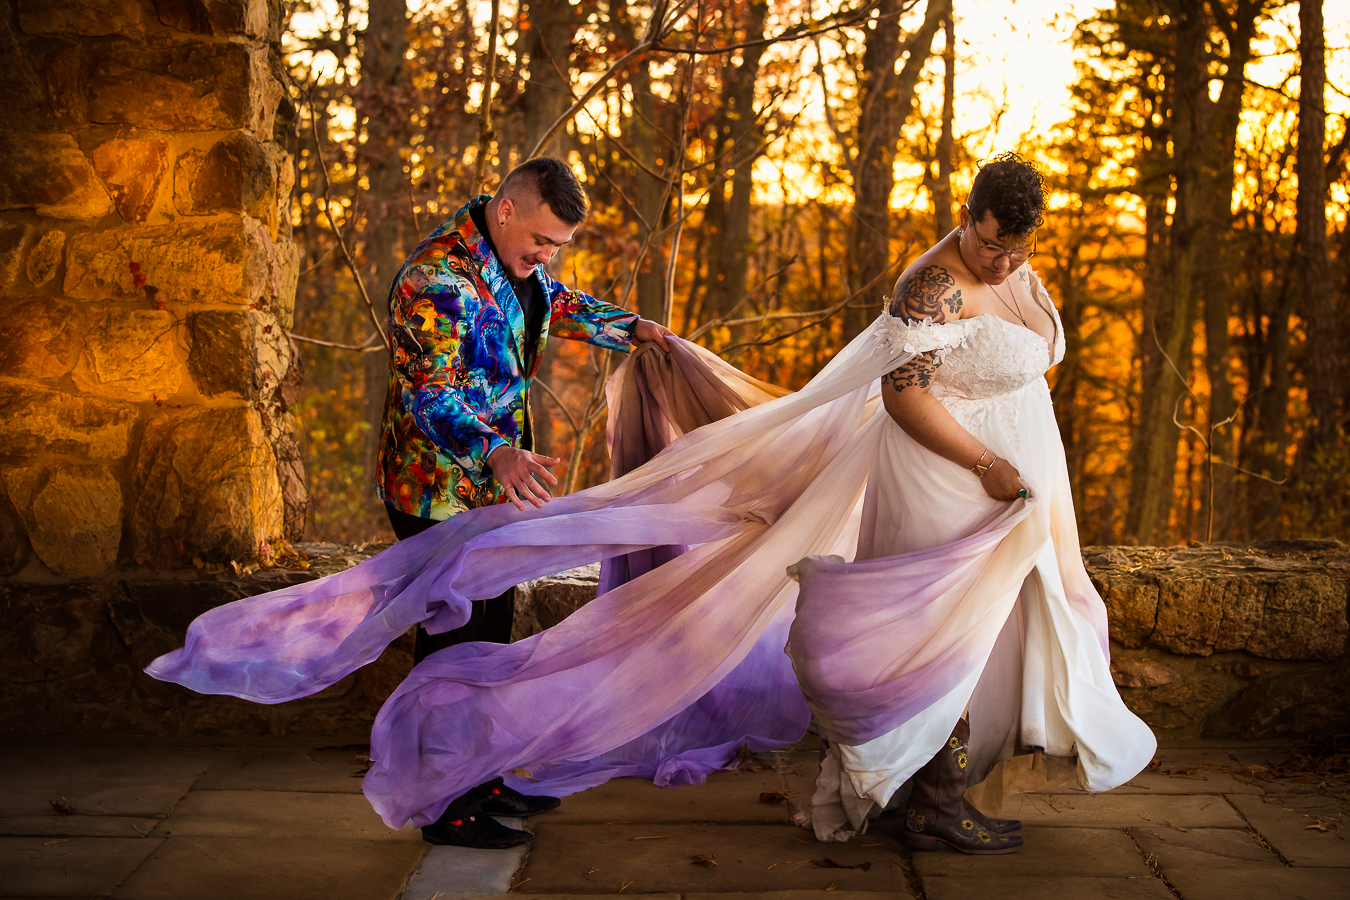 Kings gap mansion photographer, lisa rhinehart, captures this image of the couple as they are gathering the colorful dress up to head to next photo location 